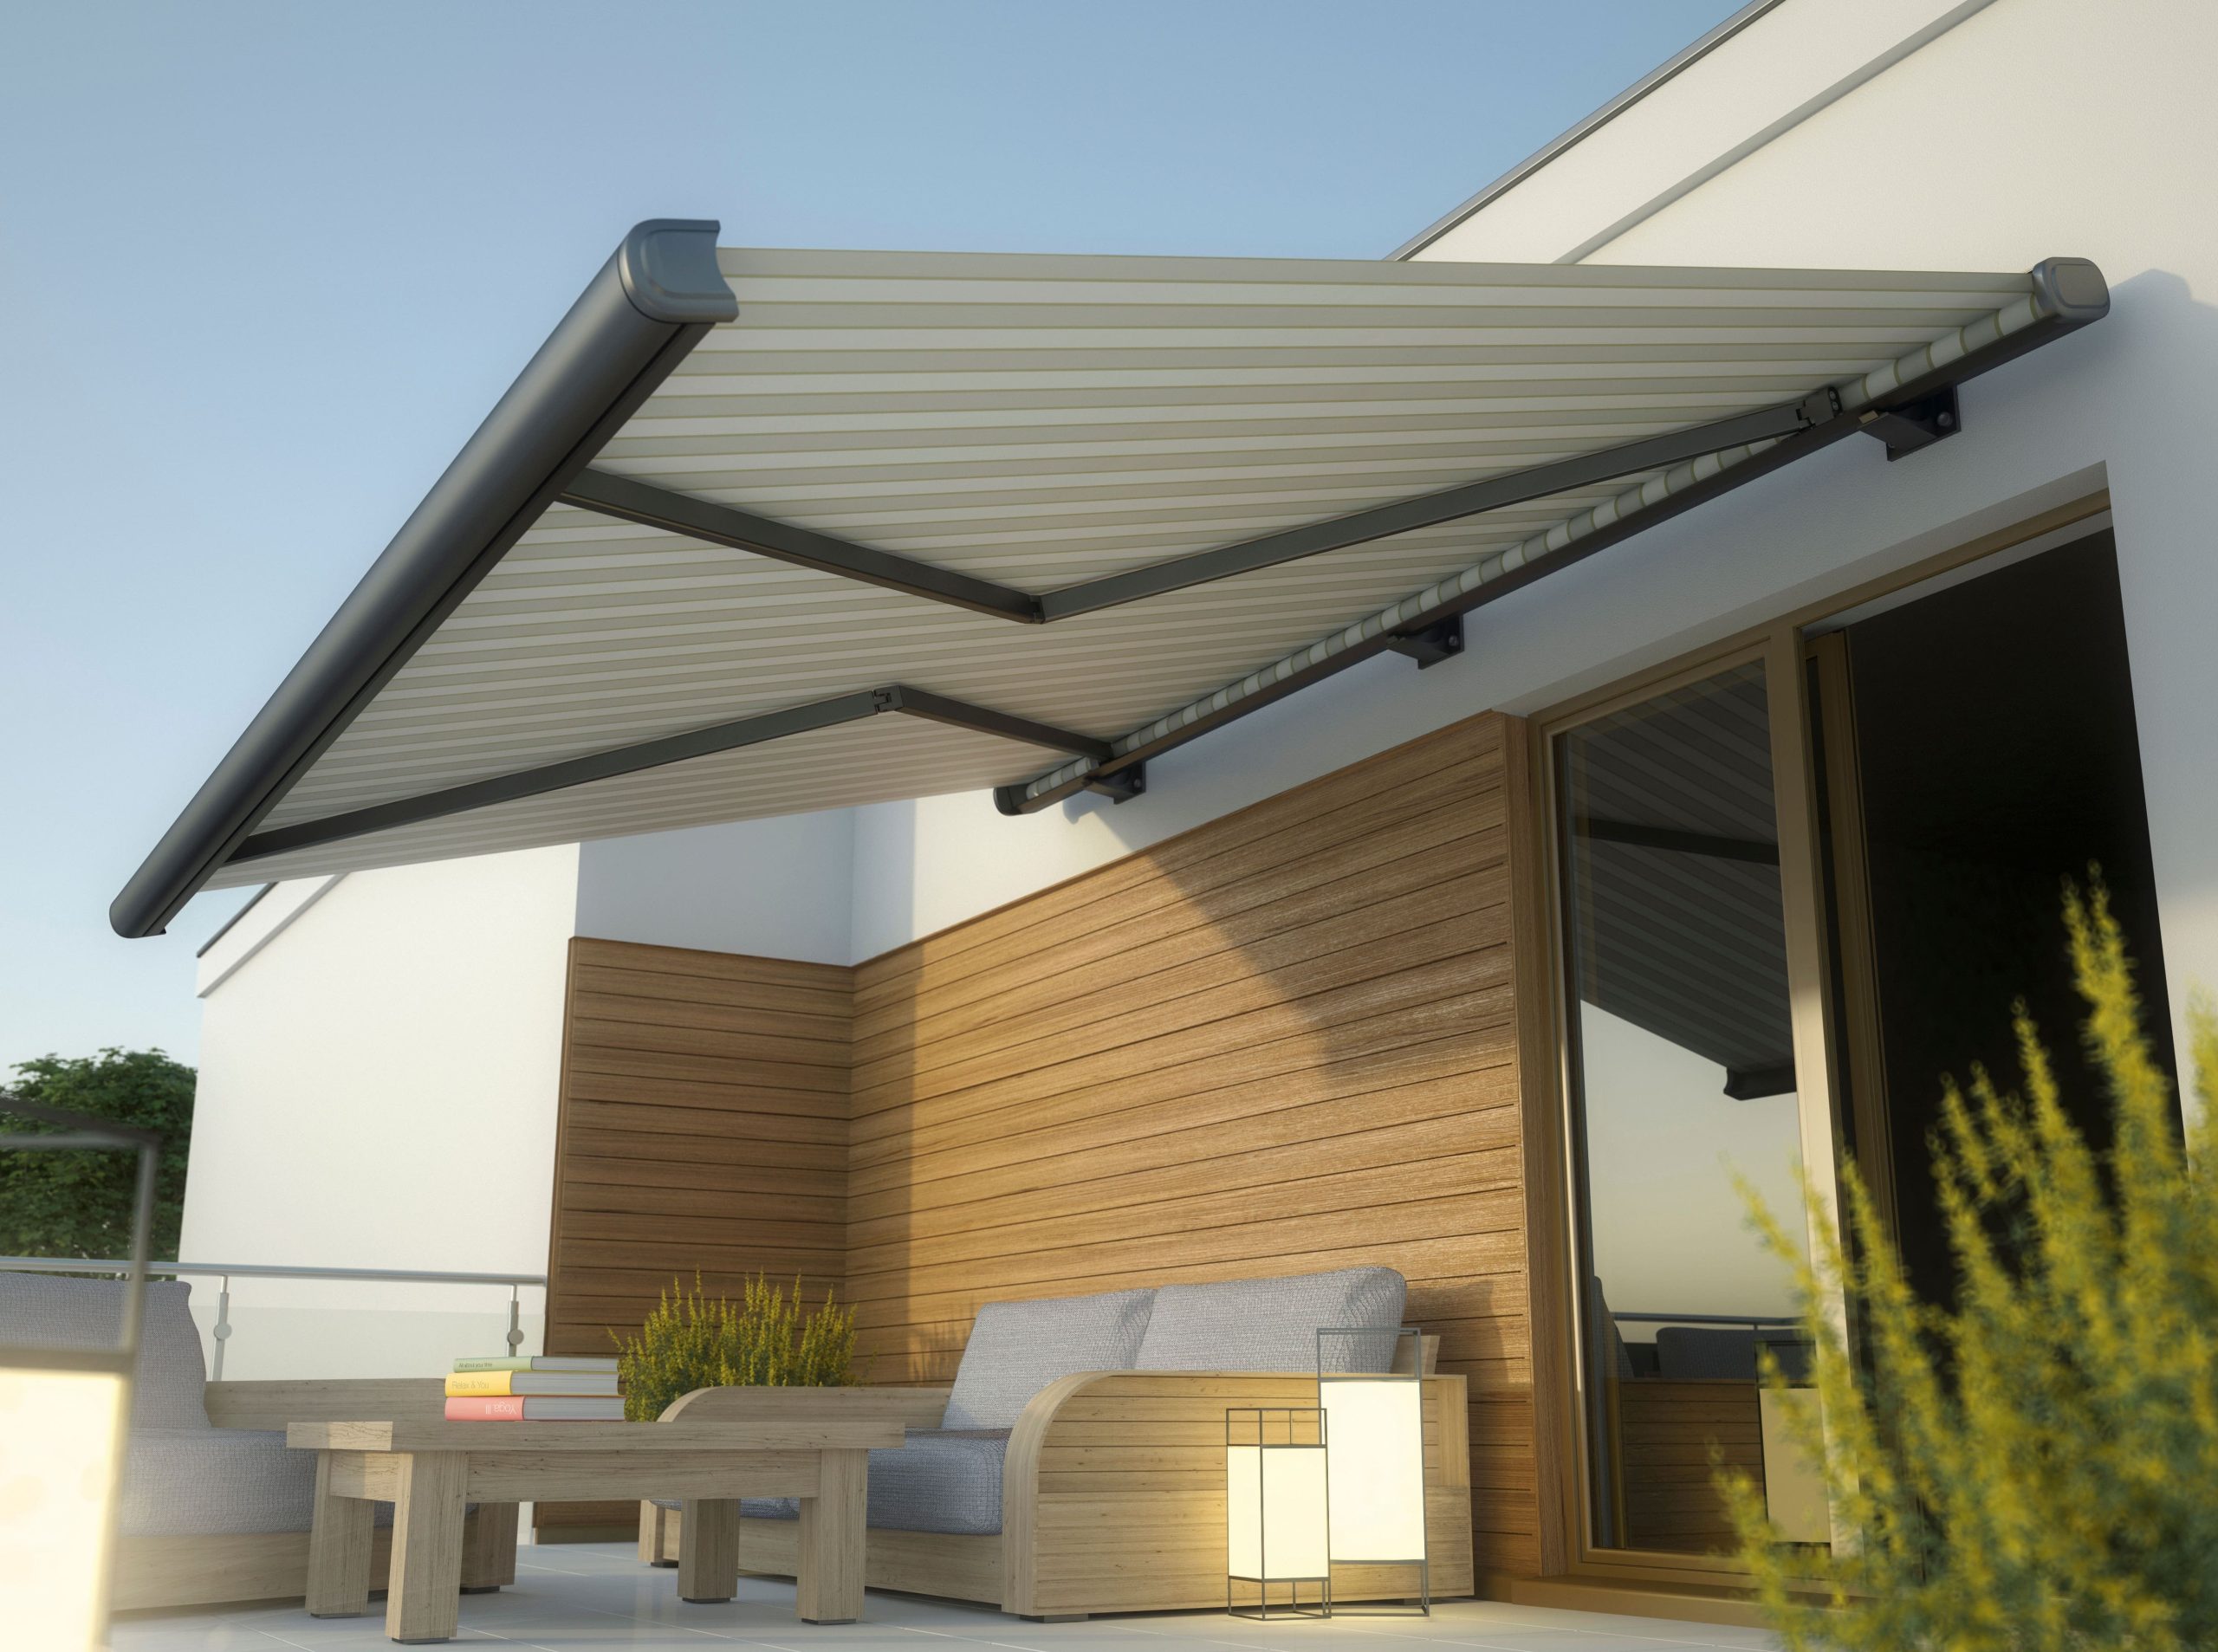 Custom retractable awnings installation in Des Moines